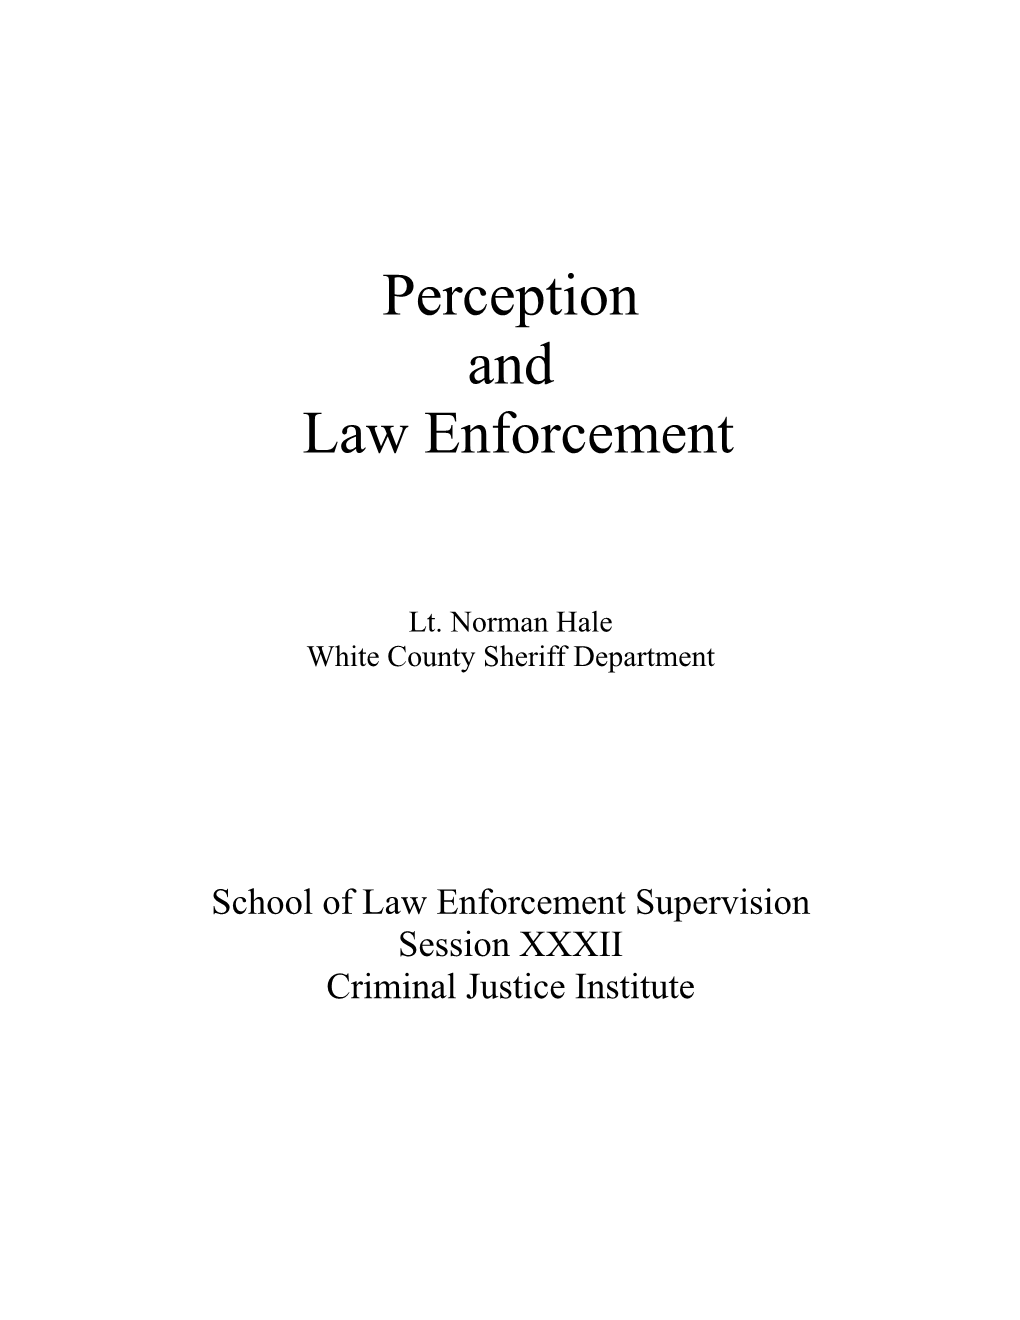 Perception and Law Enforcement